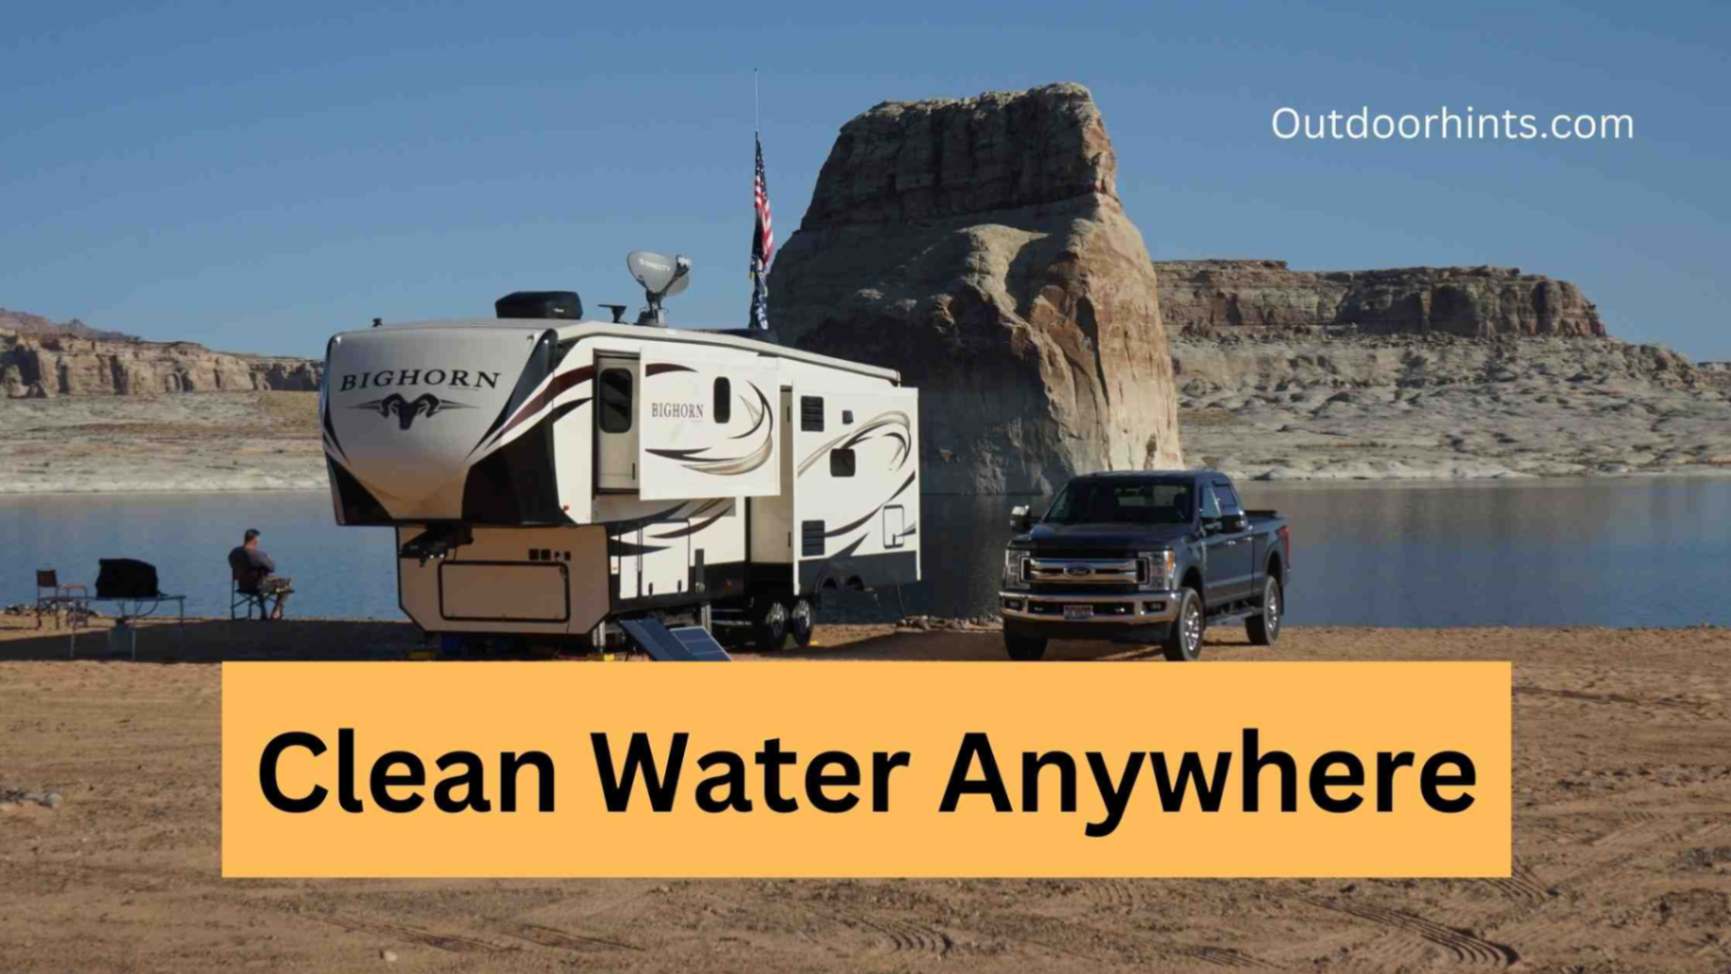 "Clean Water Anywhere"